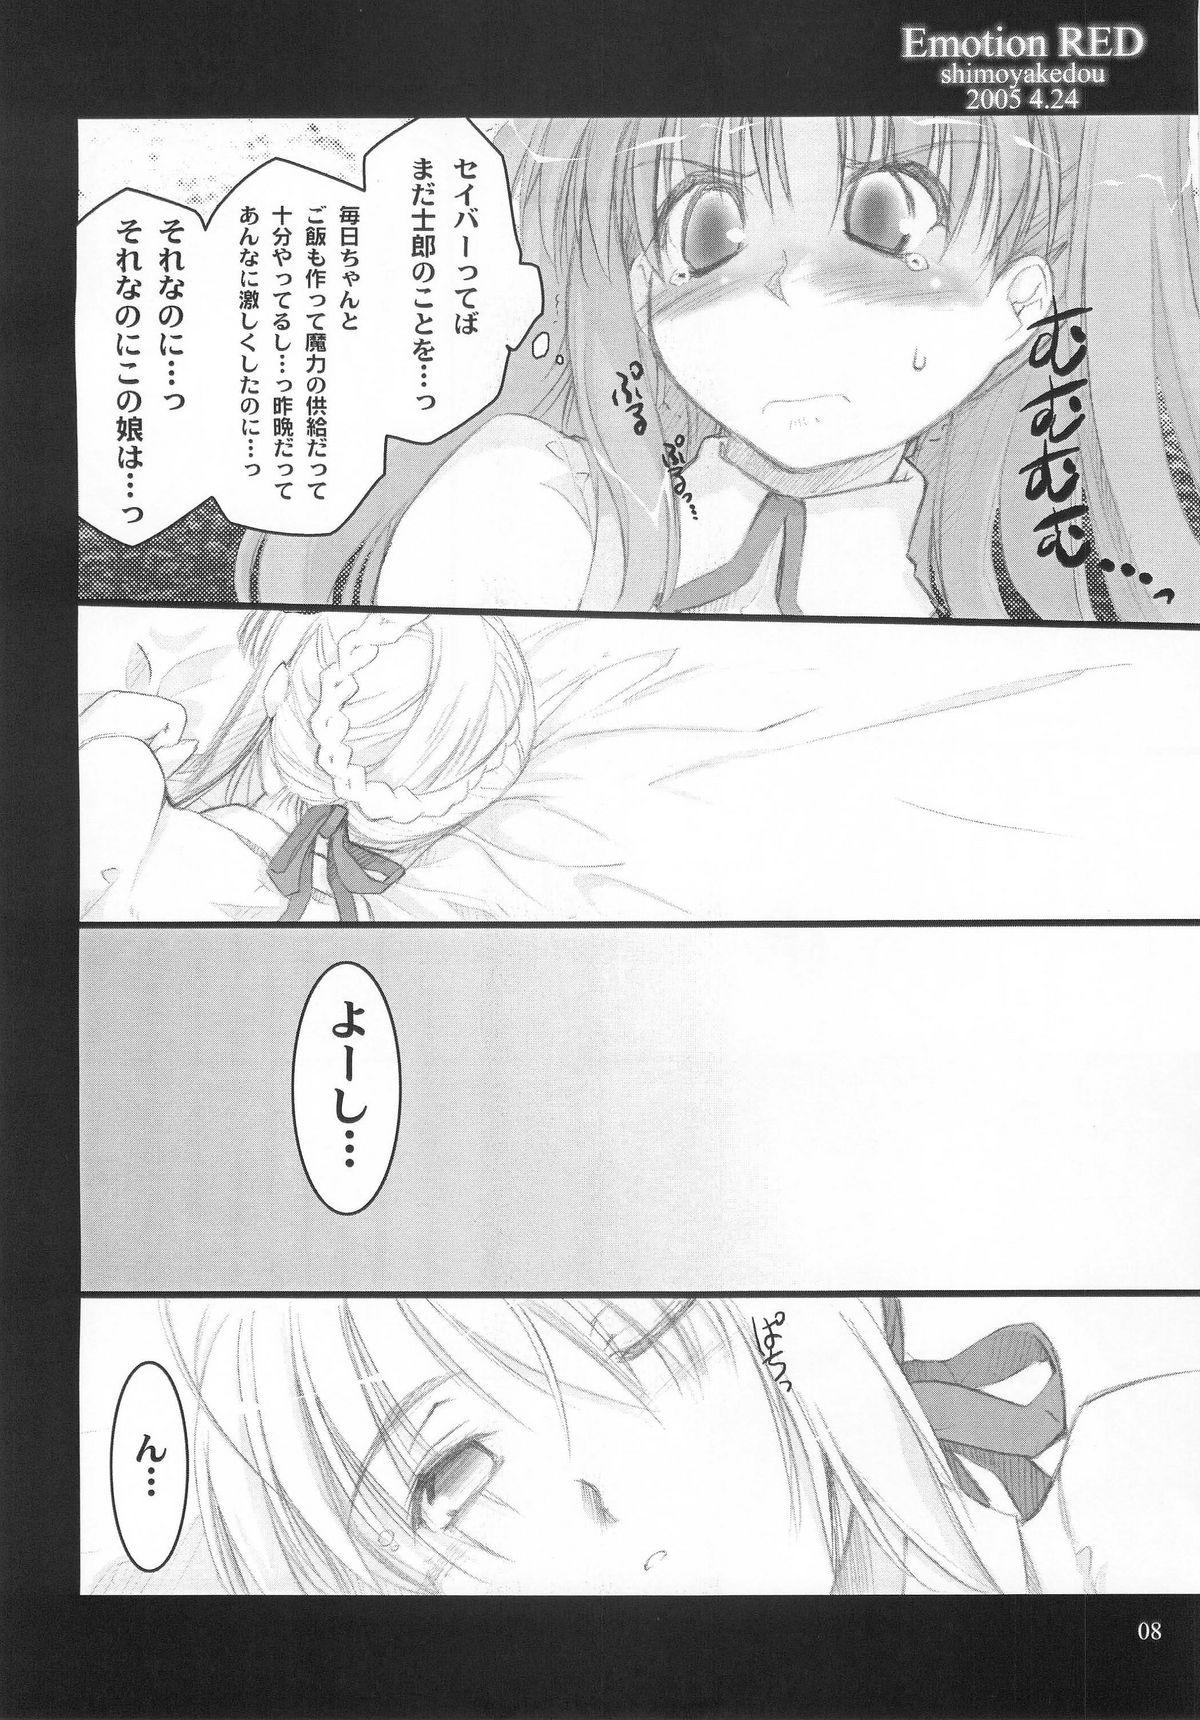 Tinder Emotion RED - Fate stay night Tia - Page 7